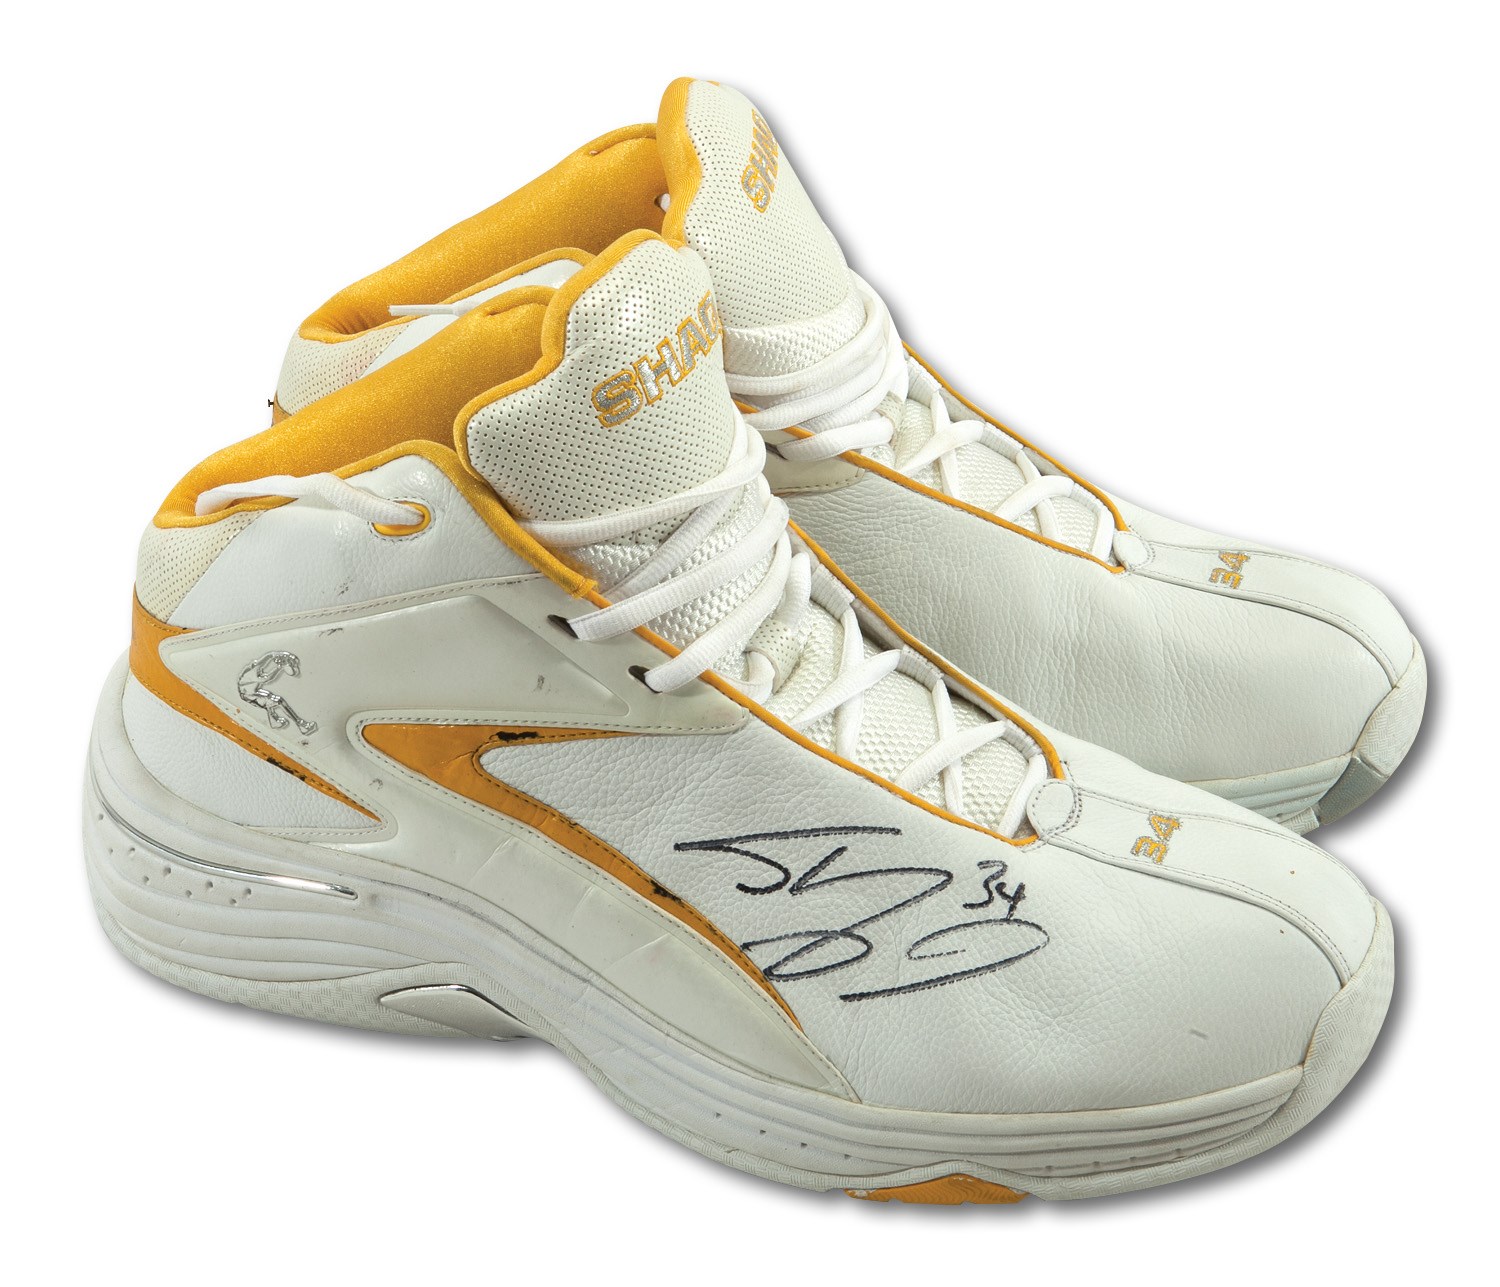 SHAQUILLE O'NEAL GAME WORN AND SIGNED SHOES